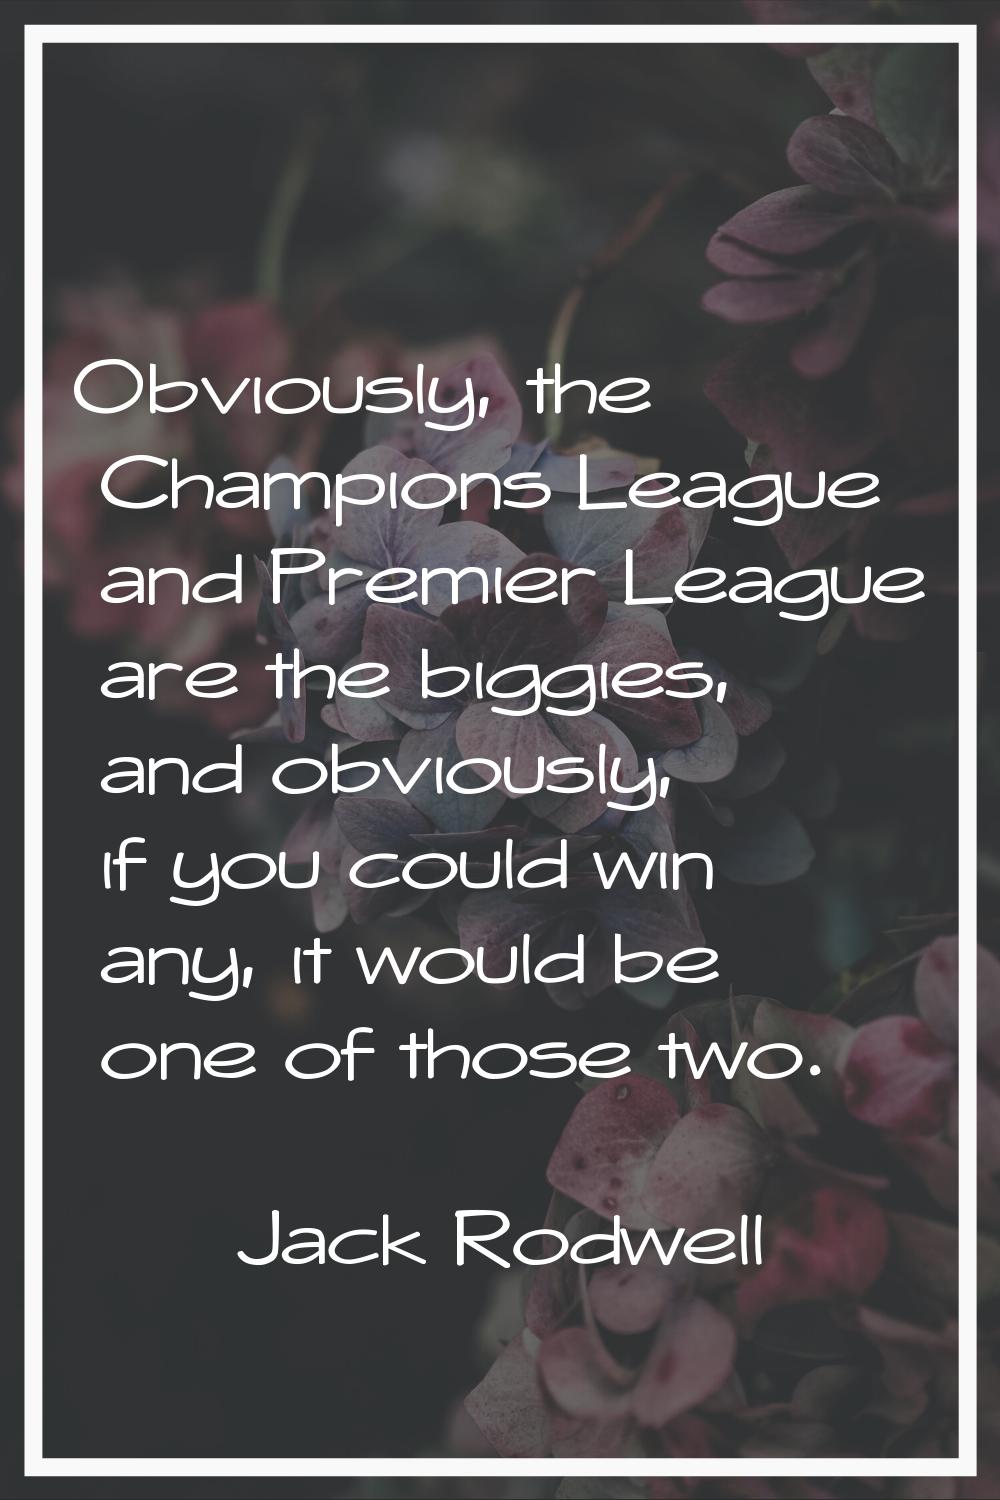 Obviously, the Champions League and Premier League are the biggies, and obviously, if you could win